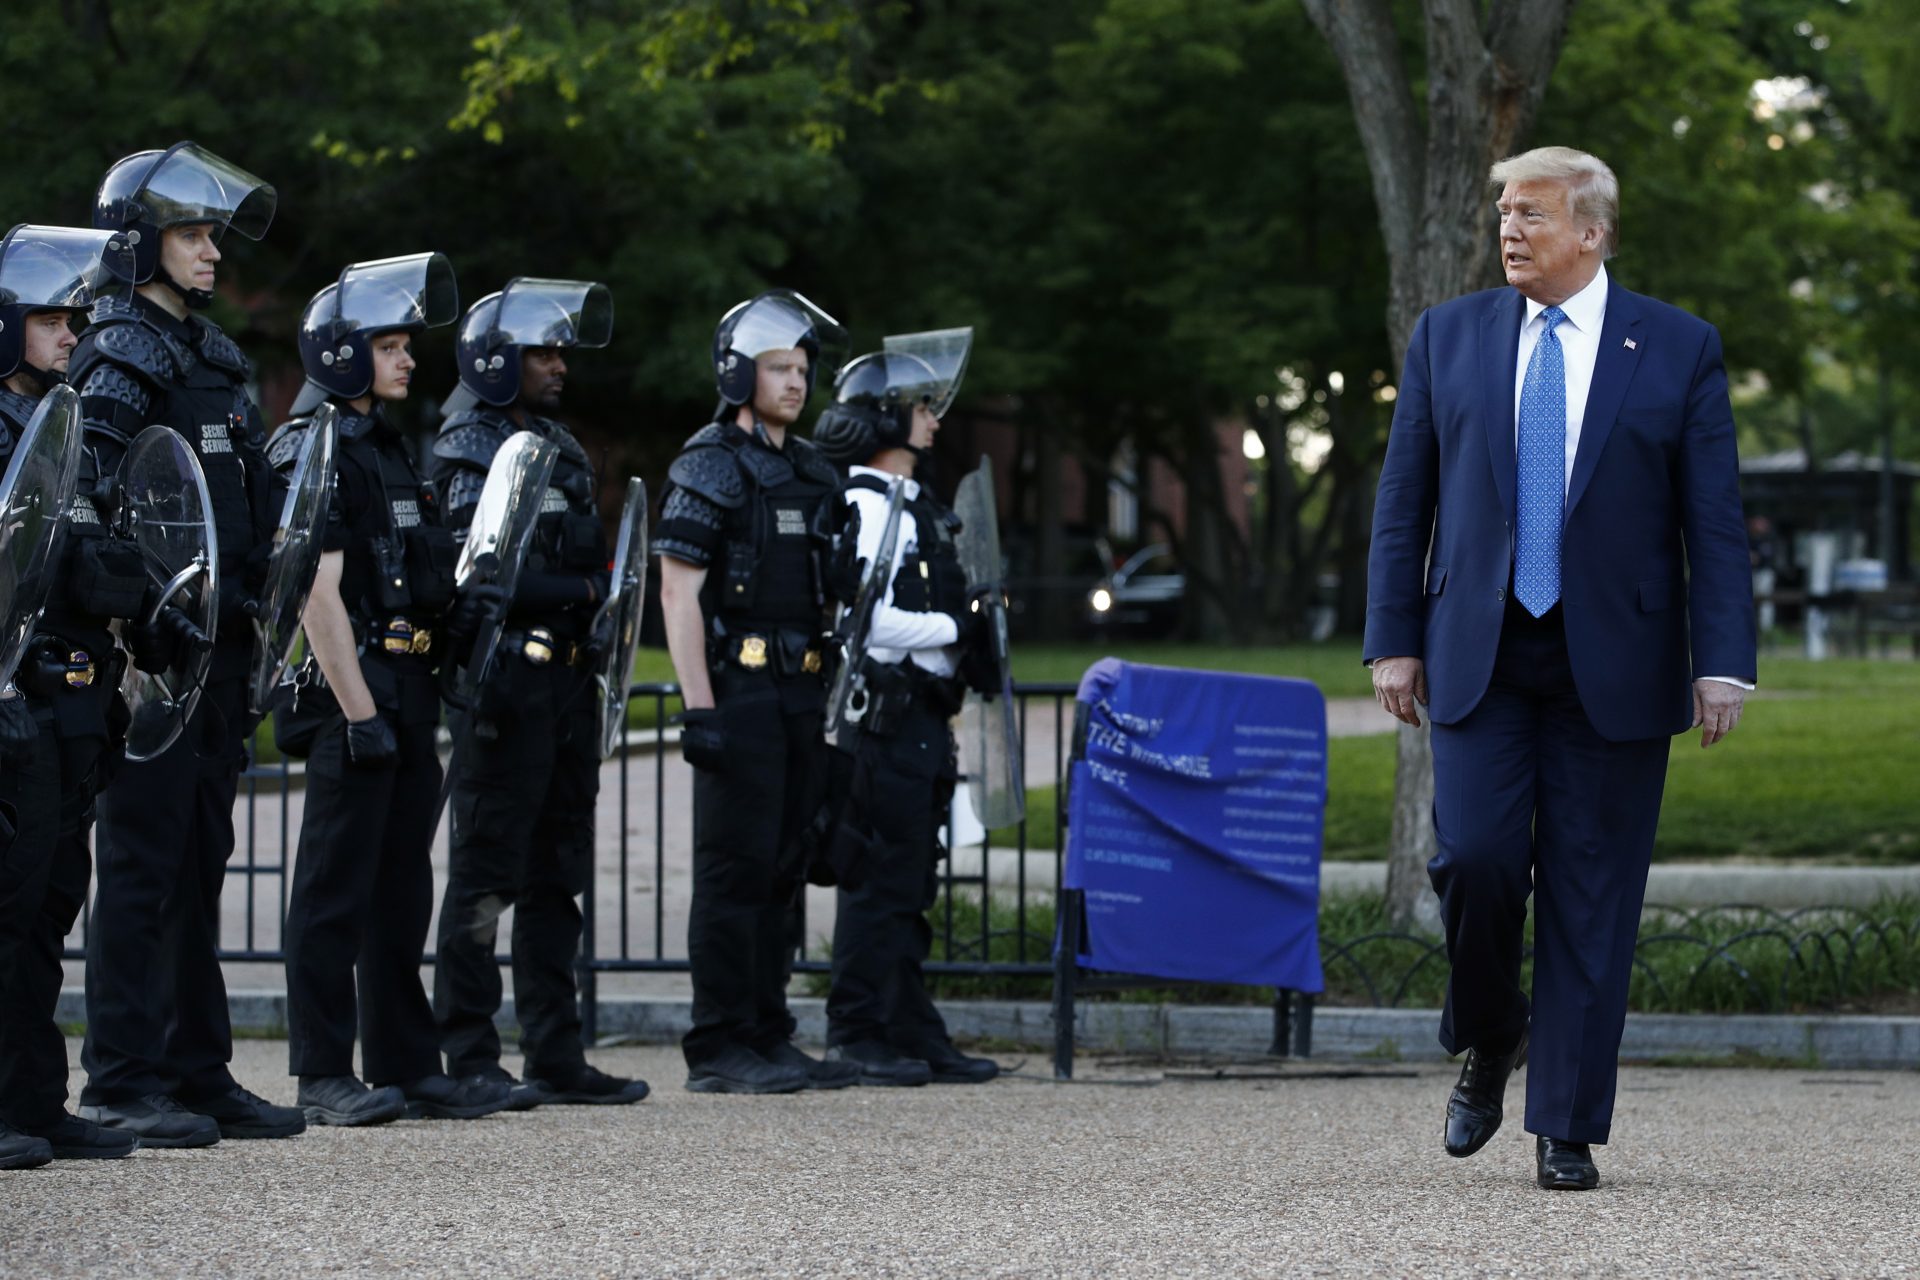 President Donald Trump walks past police in Lafayette Park after visiting outside St. John's Church across from the White House Monday, June 1, 2020, in Washington. Part of the church was set on fire during protests on Sunday night.